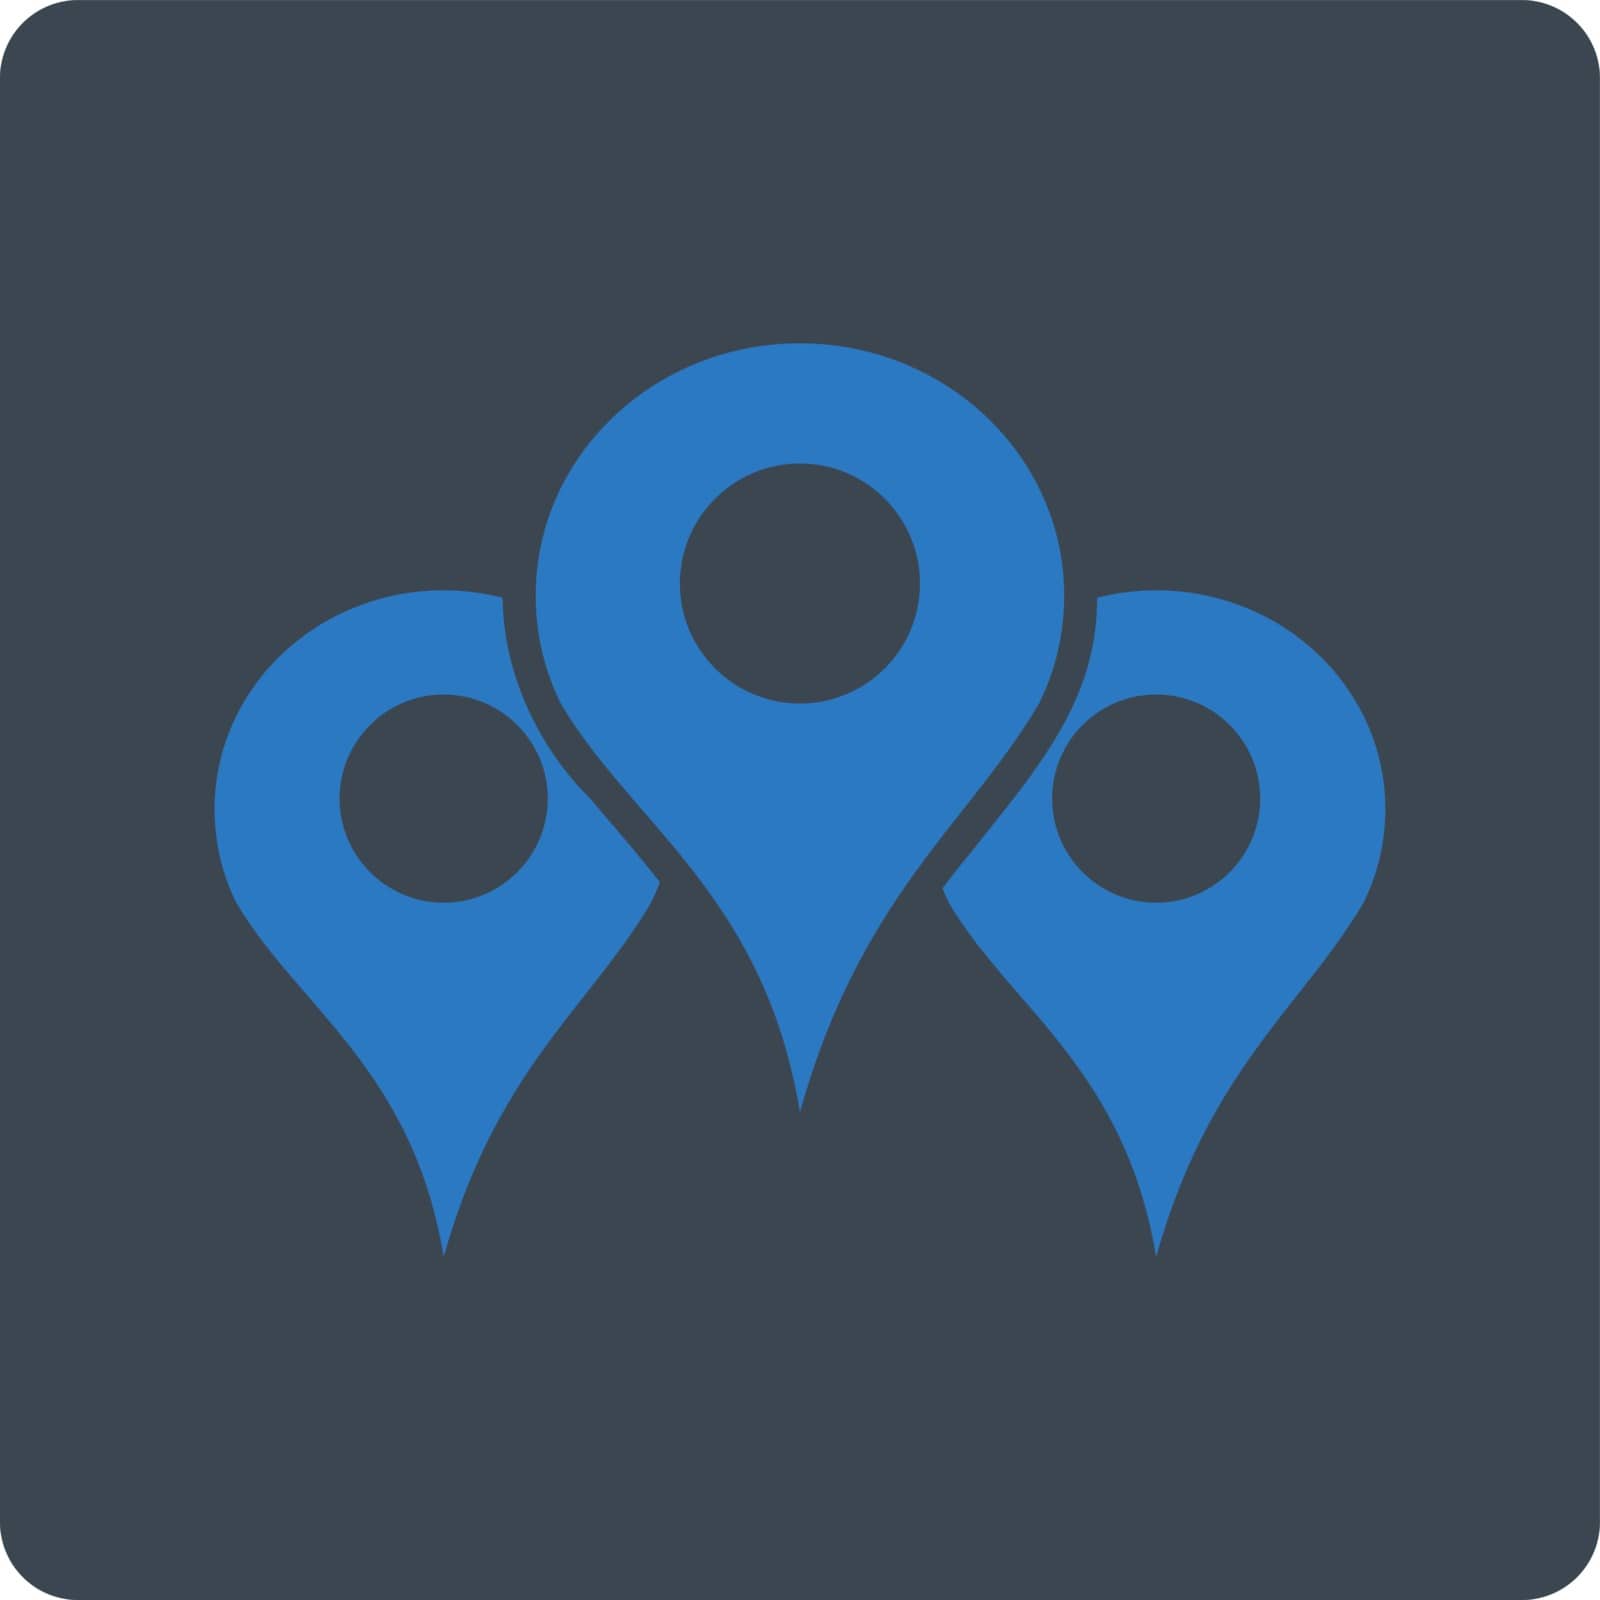 Locations vector icon. This flat rounded square button uses smooth blue colors and isolated on a white background.